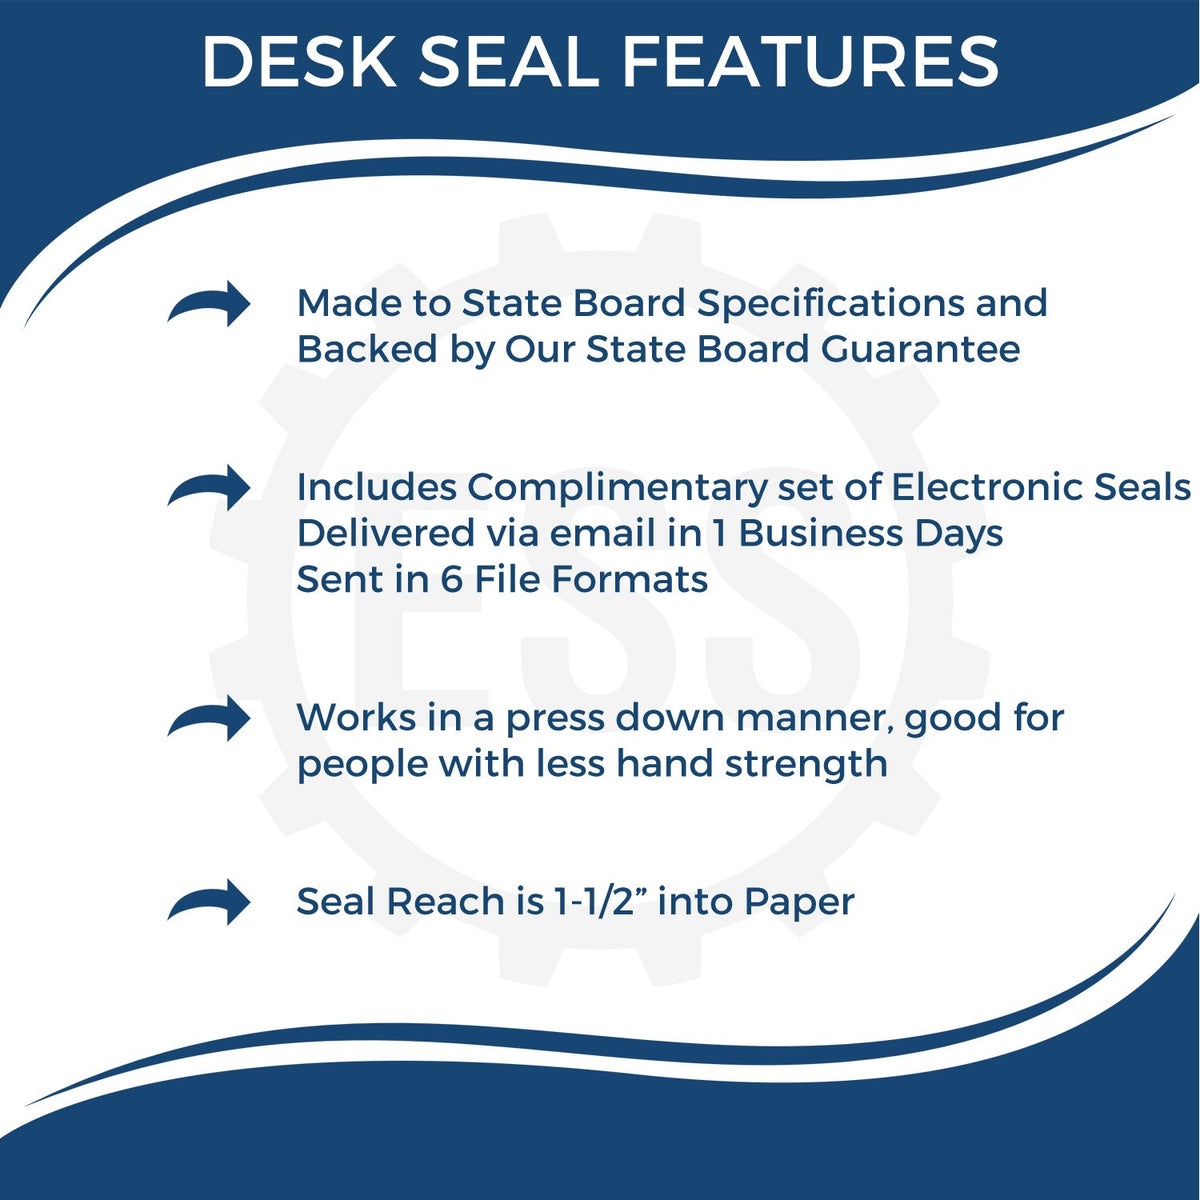 A picture of an infographic highlighting the selling points for the Louisiana Desk Architect Embossing Seal